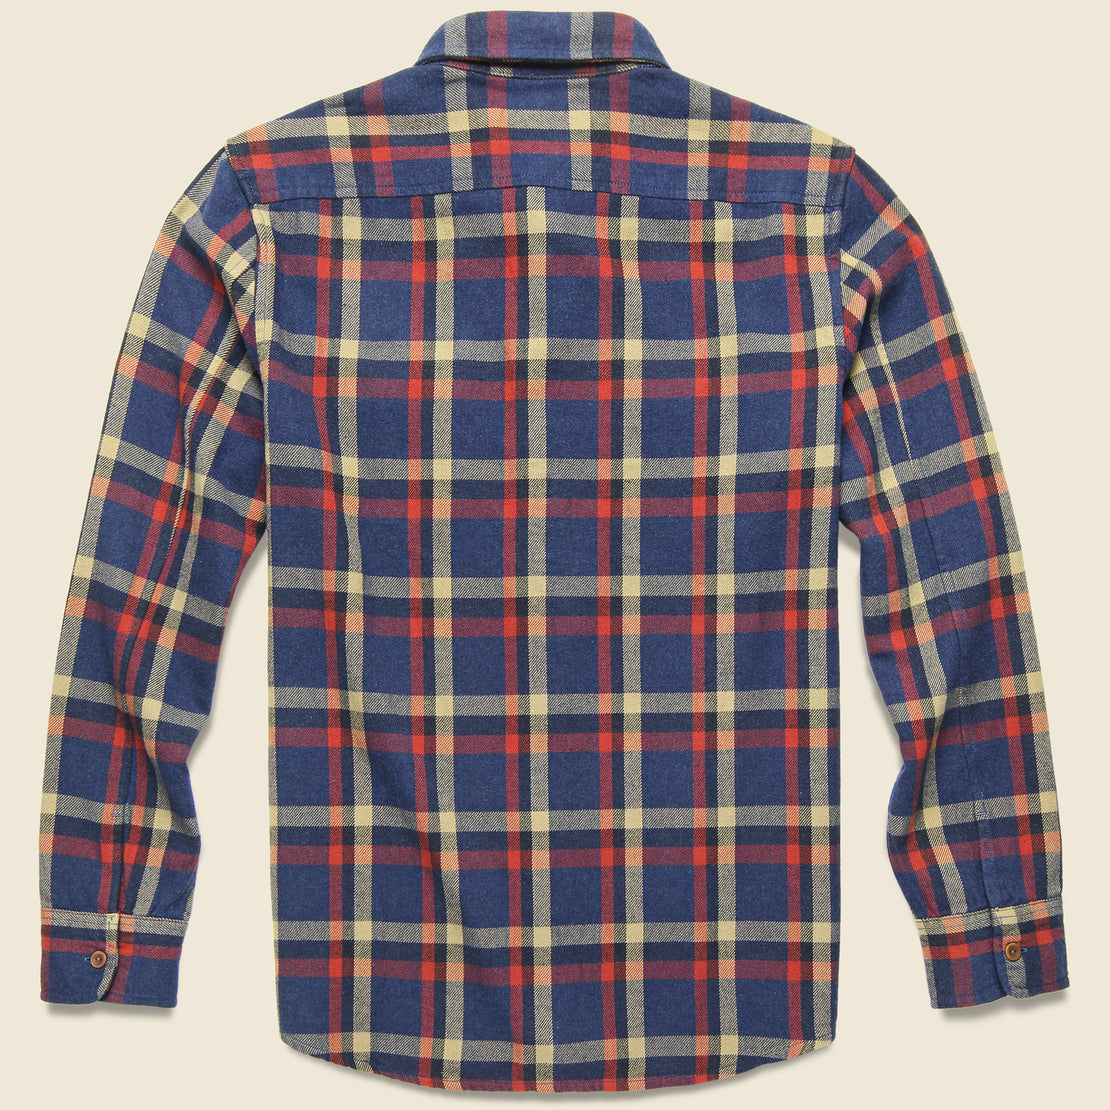 Eugene Heritage Flannel Shirt - Navy Plaid - Grayers - STAG Provisions - Tops - L/S Woven - Plaid